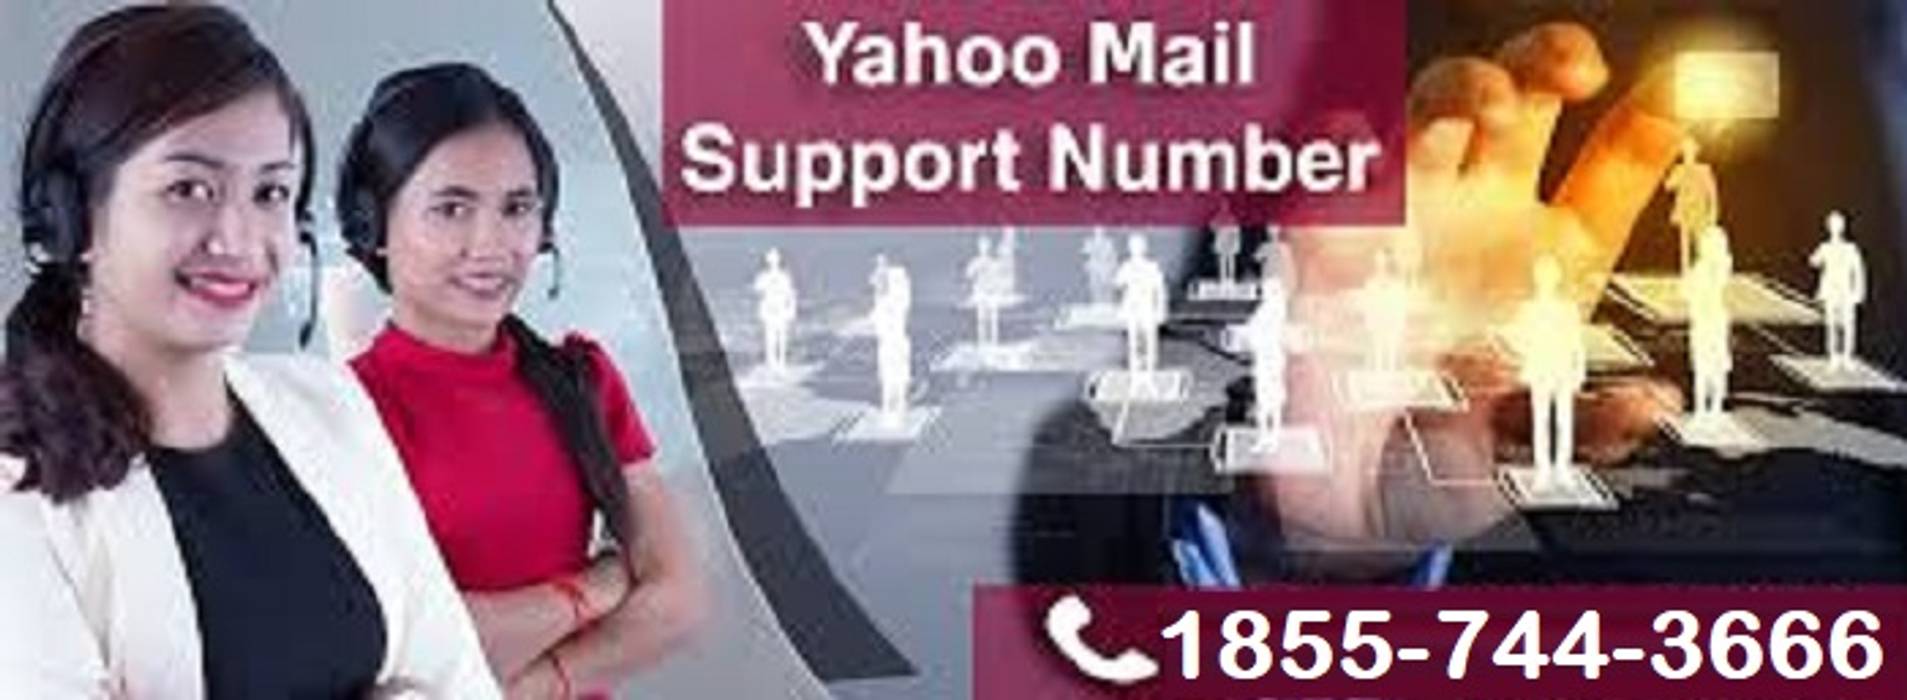 Get support from our experts through Yahoo Mail Customer Care Service Number Yahoo Customer Support Number Airports Aluminium/Zinc Amber/Gold